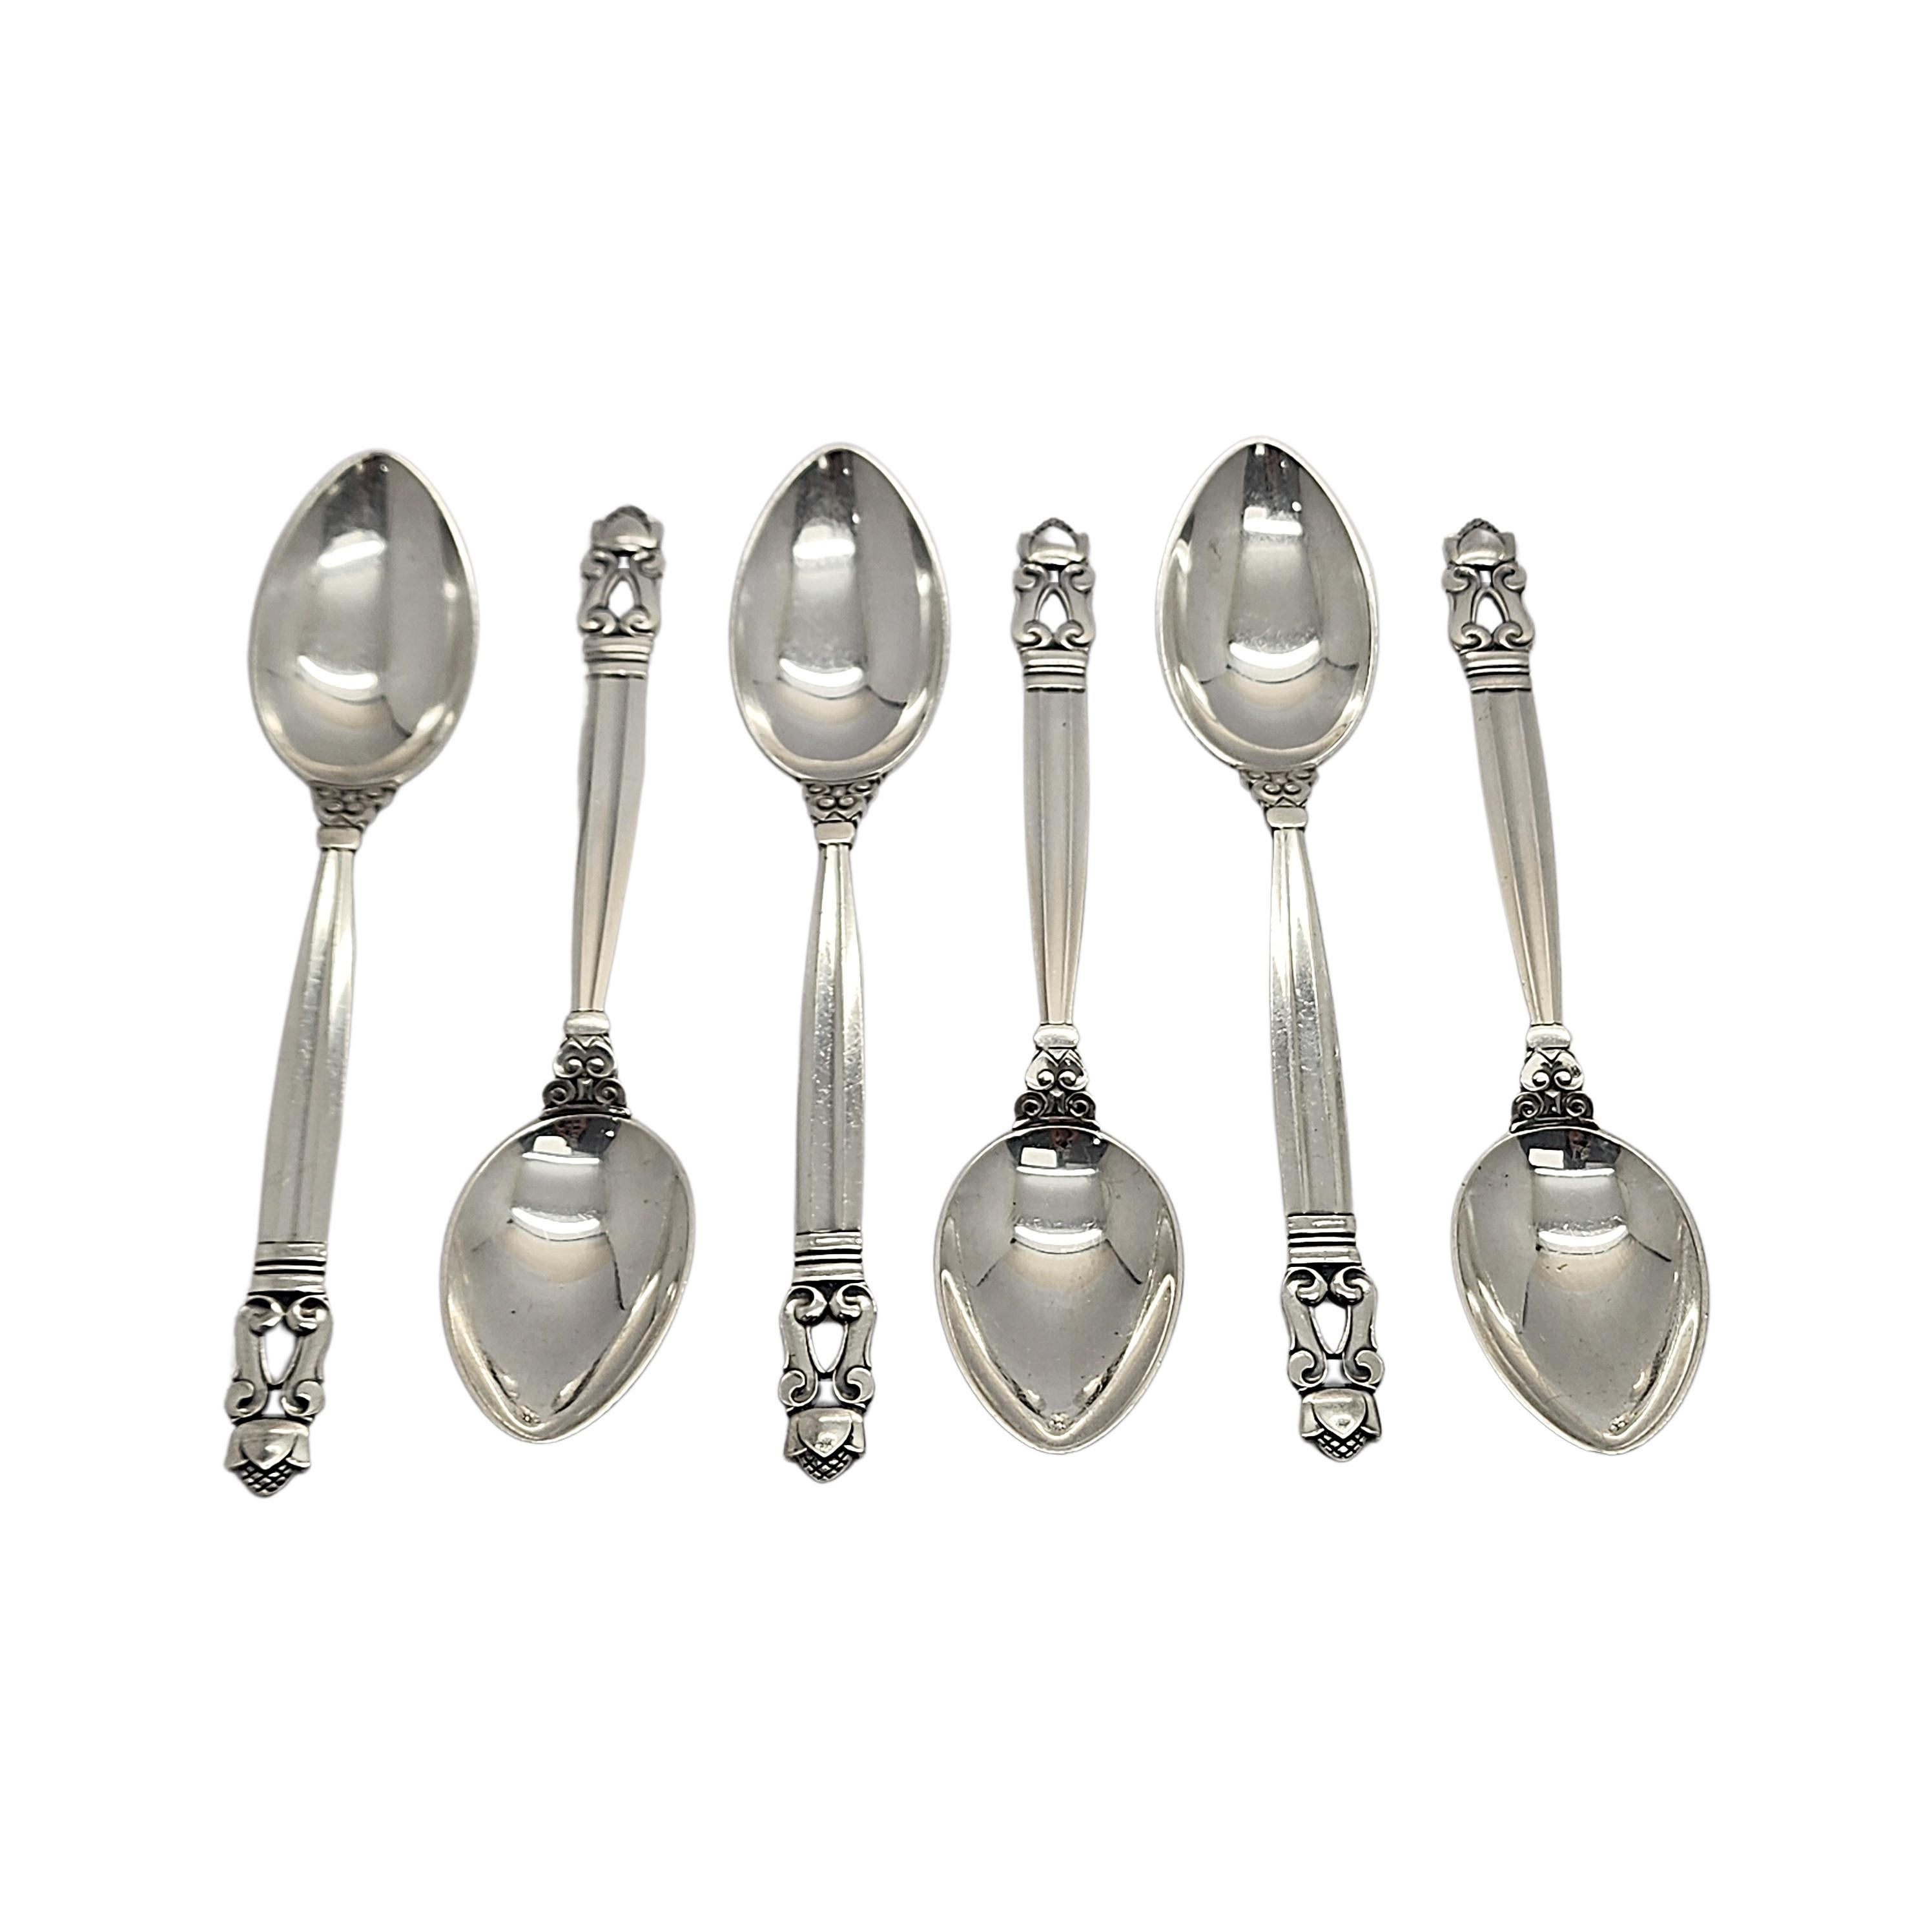 Set of 6 sterling silver teaspoons in the Acorn pattern by Georg Jensen.

The Acorn pattern was introduced in 1915 as a collaboration between Georg Jensen and designer Johan Ronde. The Acorn pattern, which combines Art Nouveau and Art Deco styles,